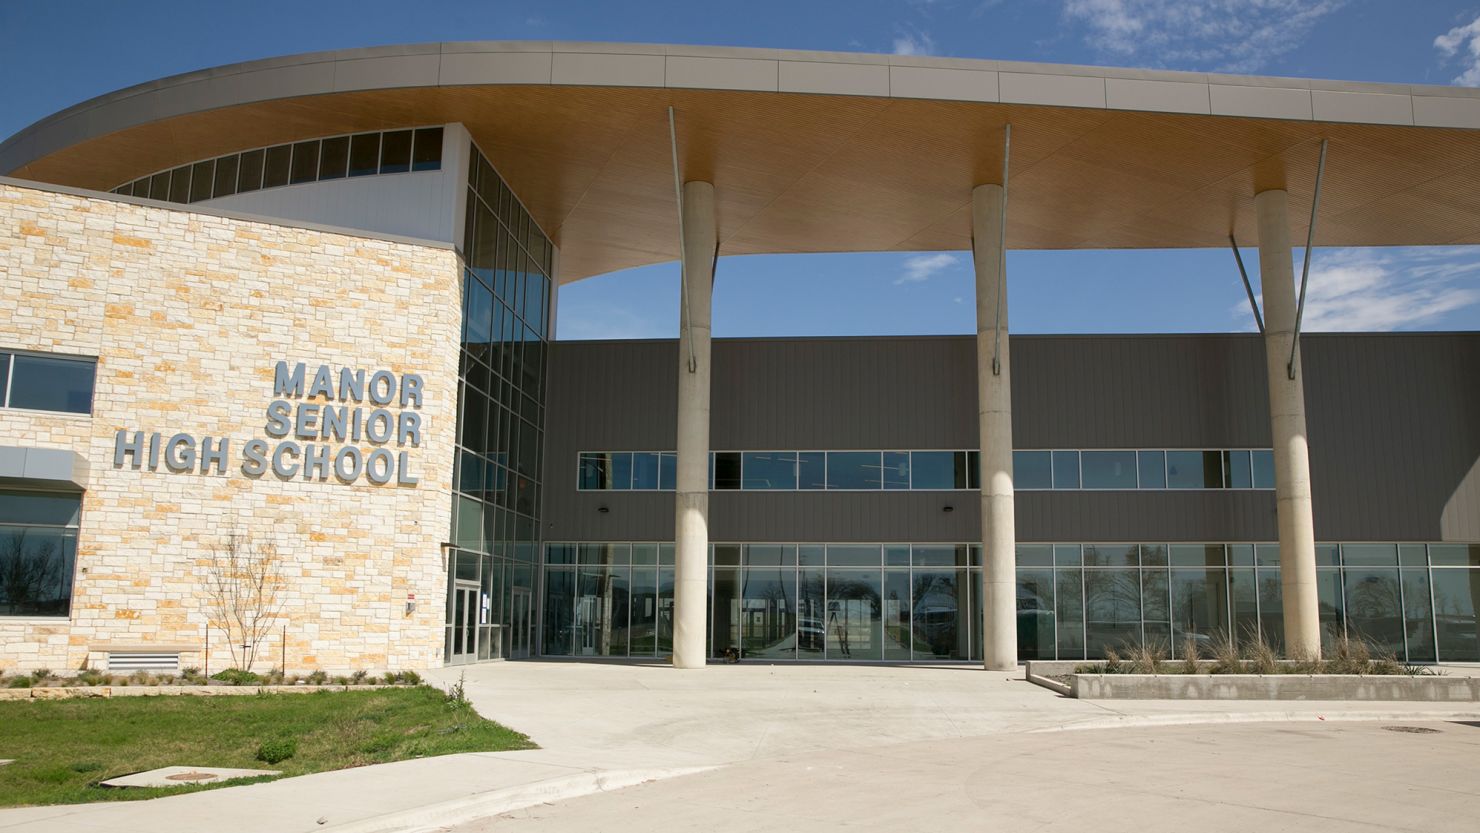 Manor Senior High School in Manor, Texas, within the Manor Independent School District.